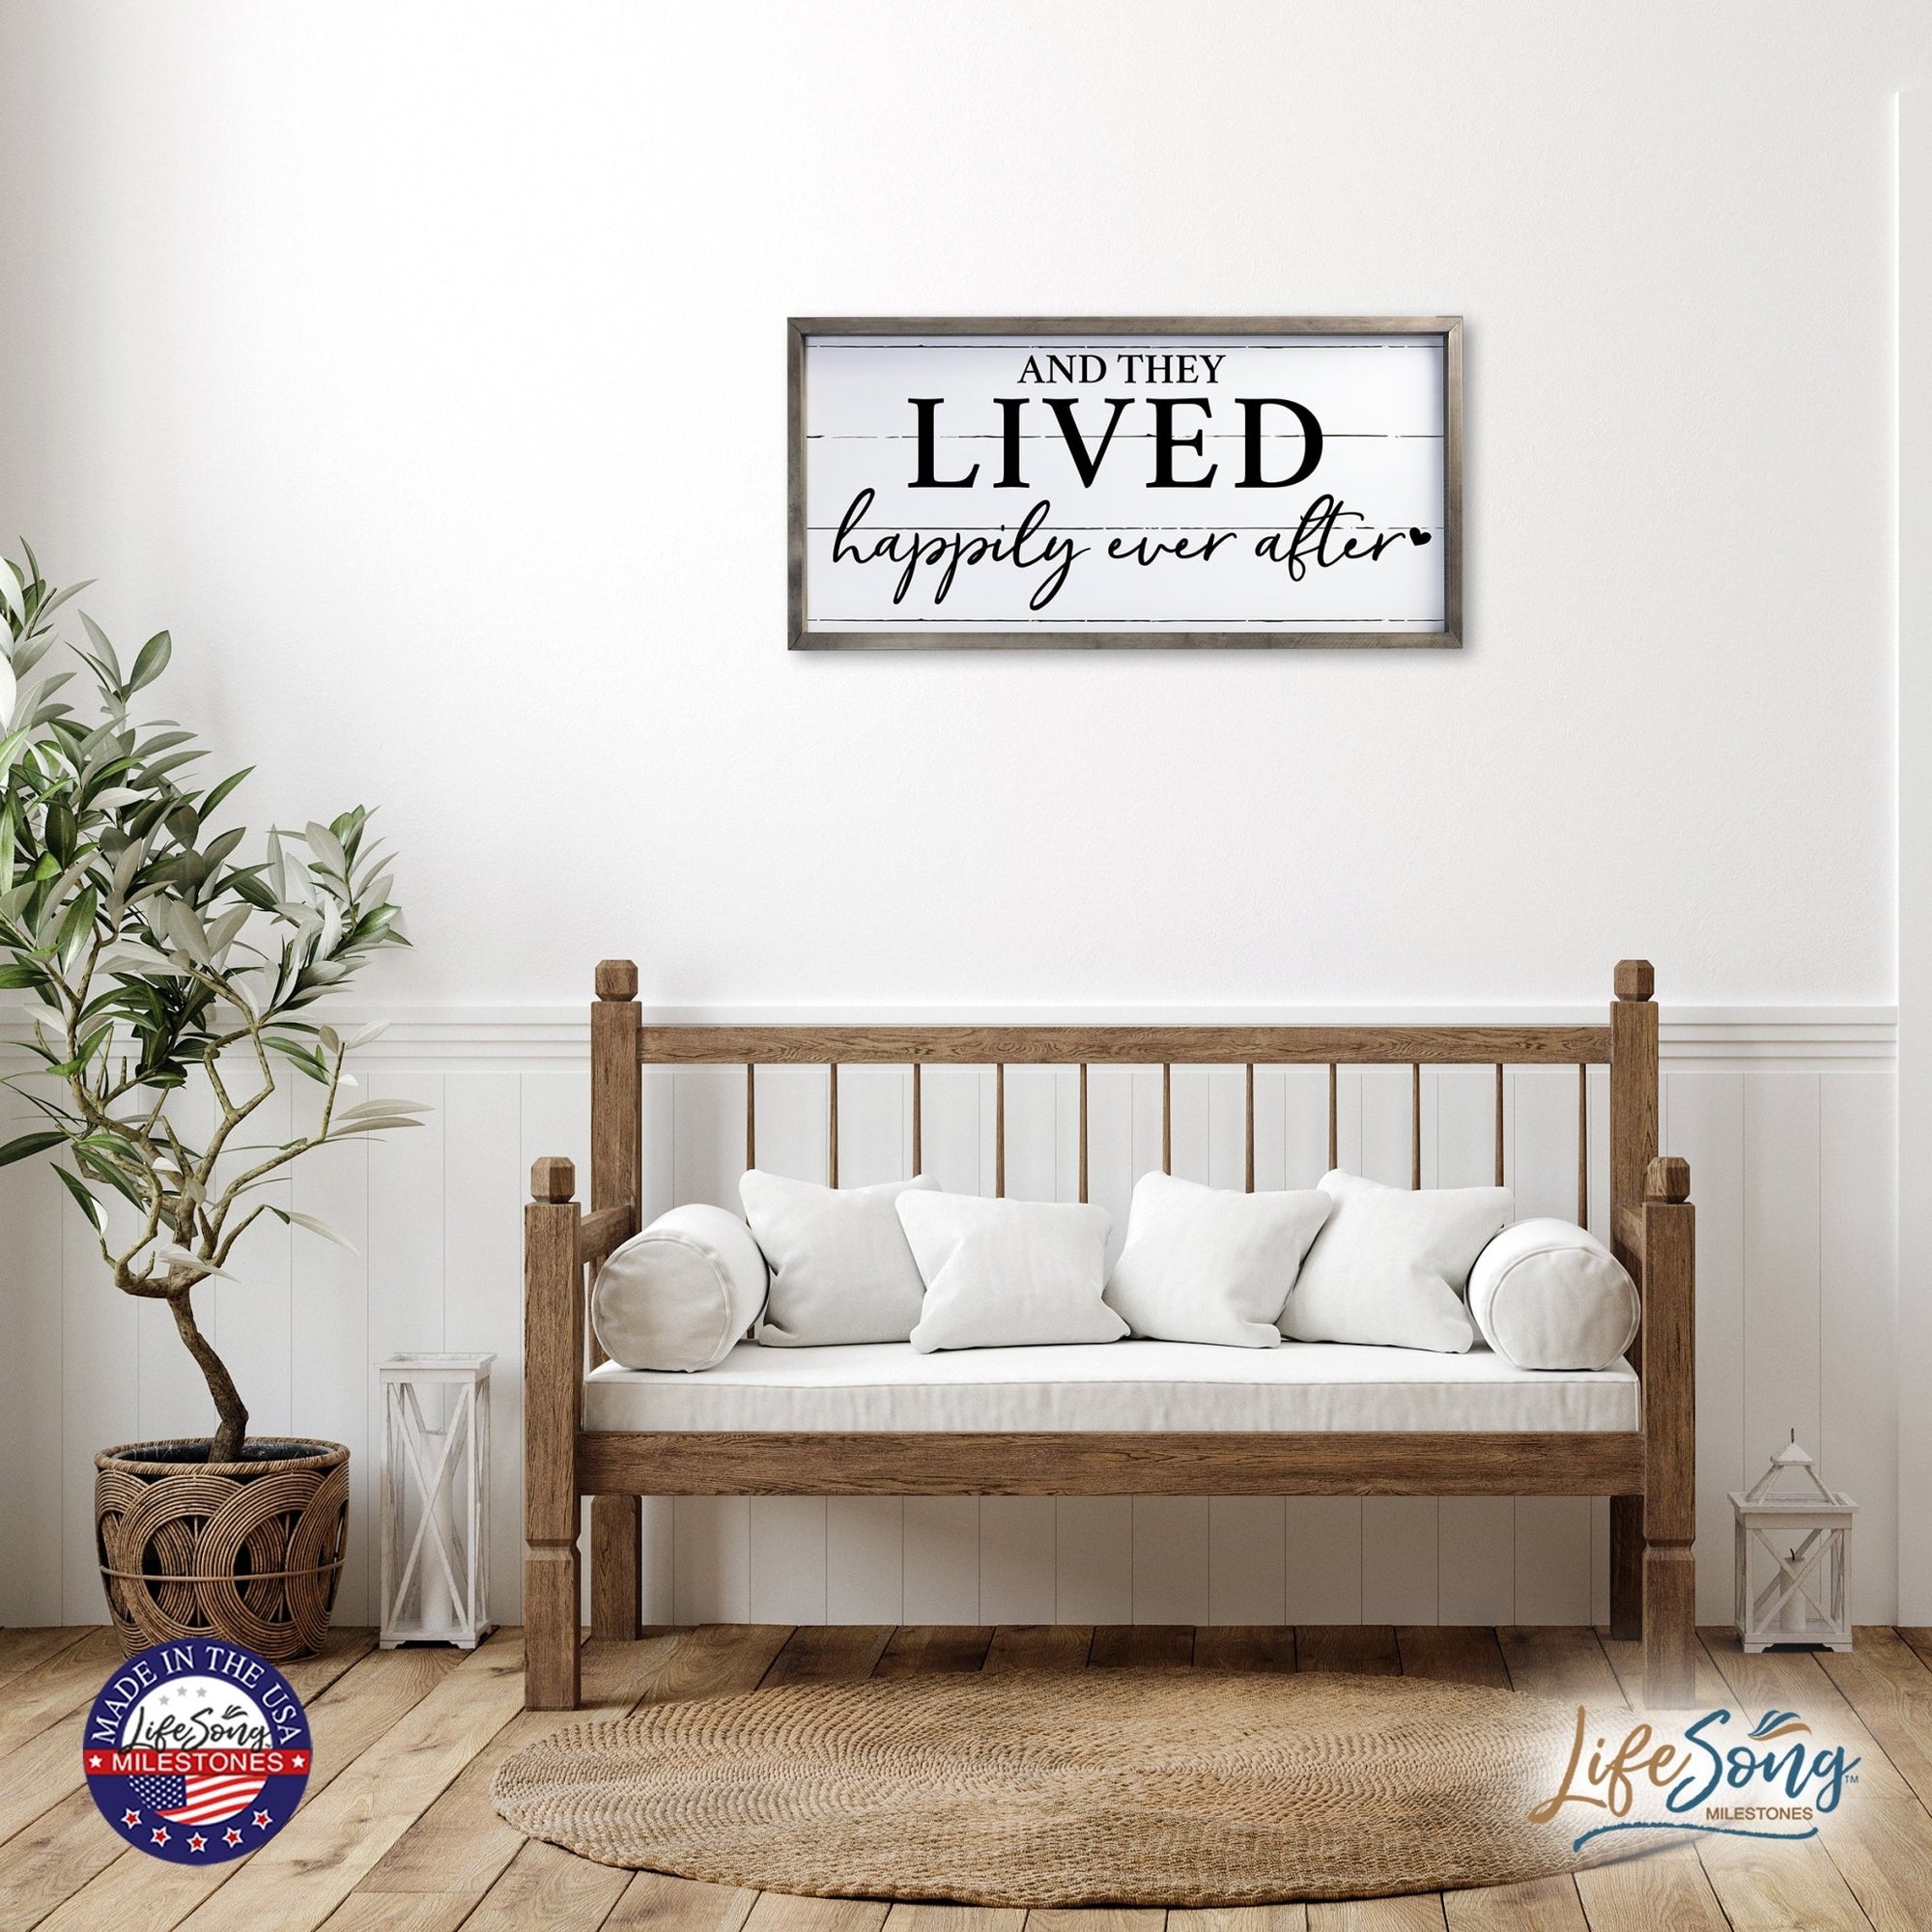 Large Family Wall Décor Quote Sign For Home Decoration 18 x 36 - Happily Ever After - LifeSong Milestones